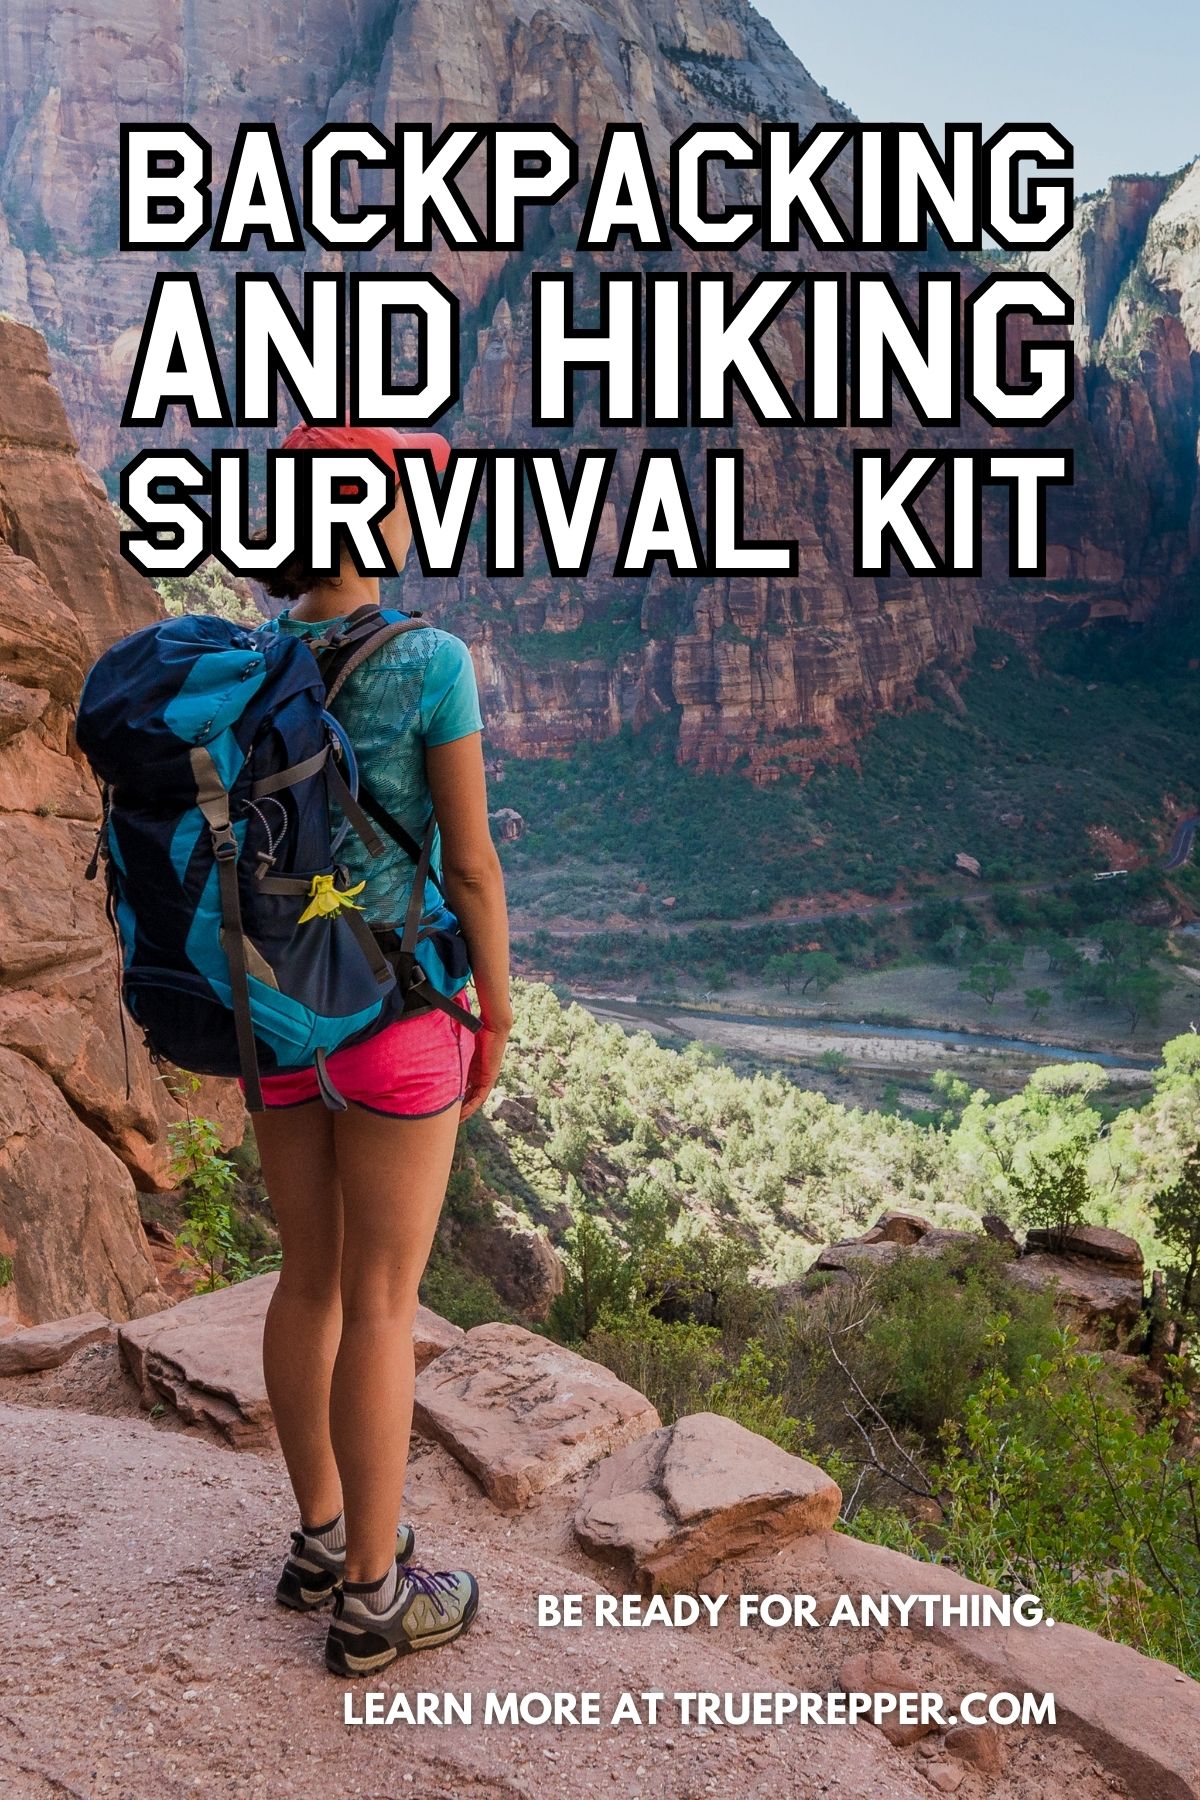 Backpacking and hiking survival kit in woman's backpack while hiking in a canyon.